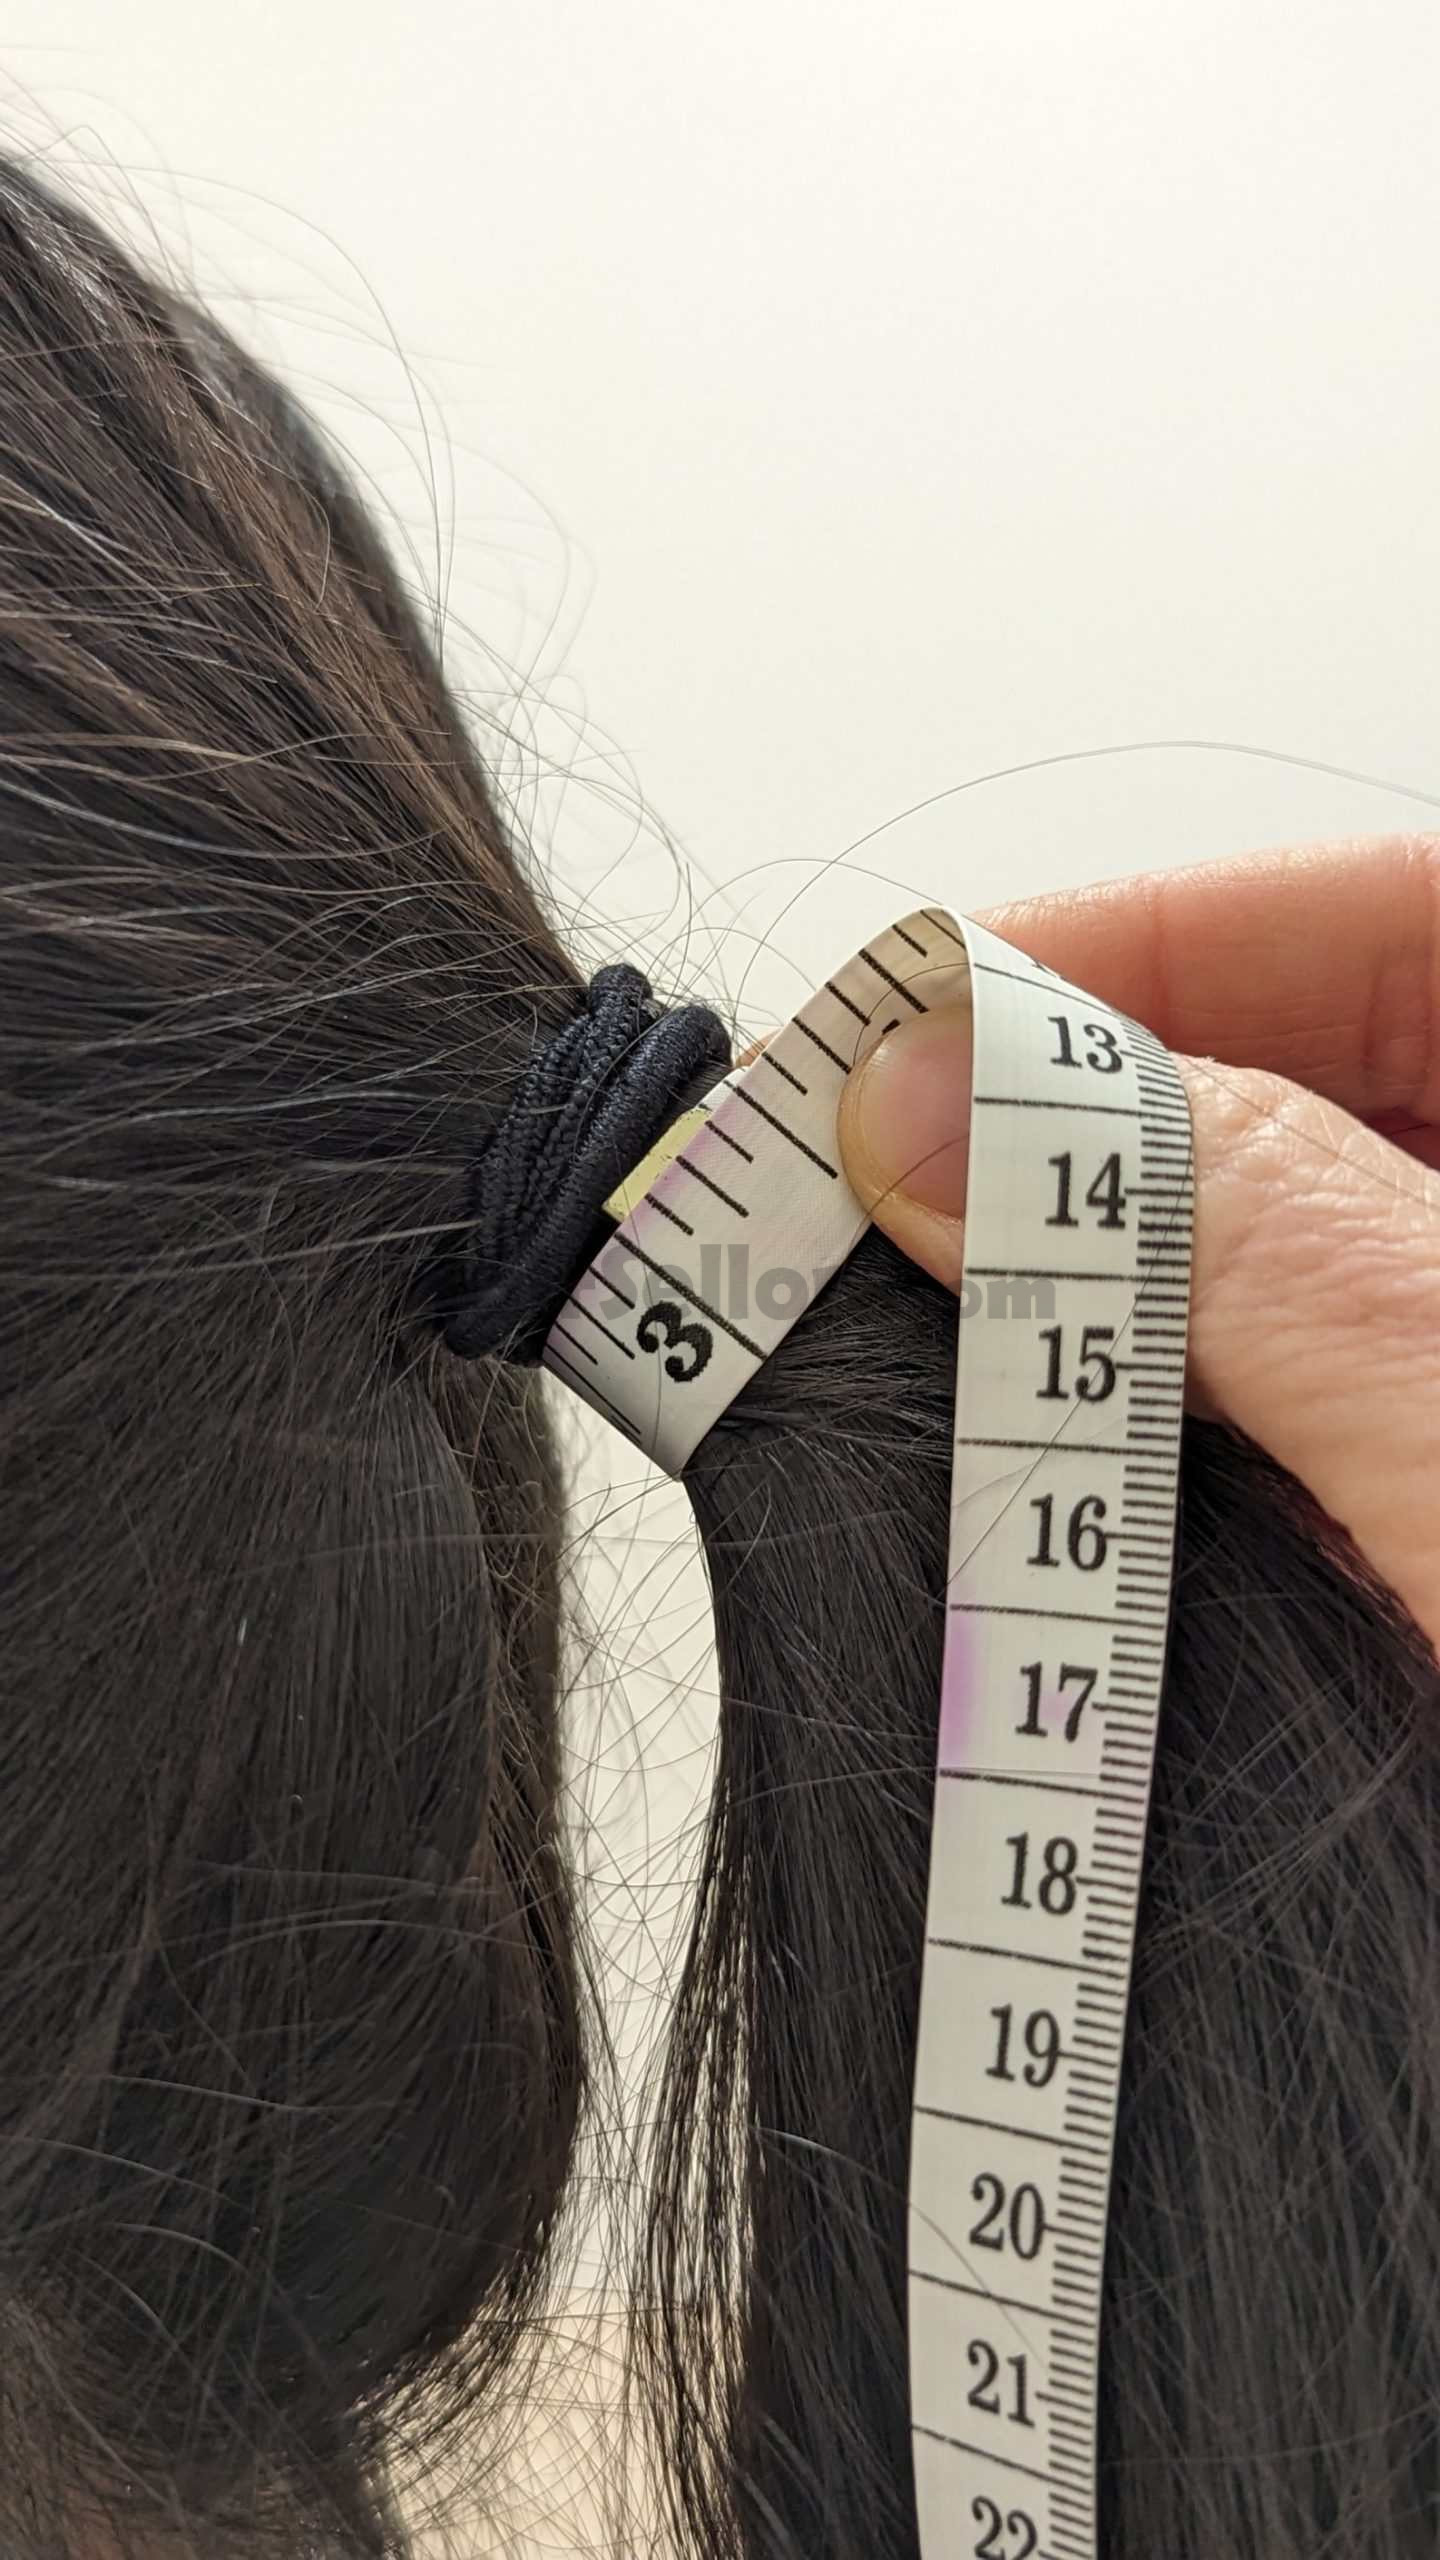 Showing how to measure hair thickness